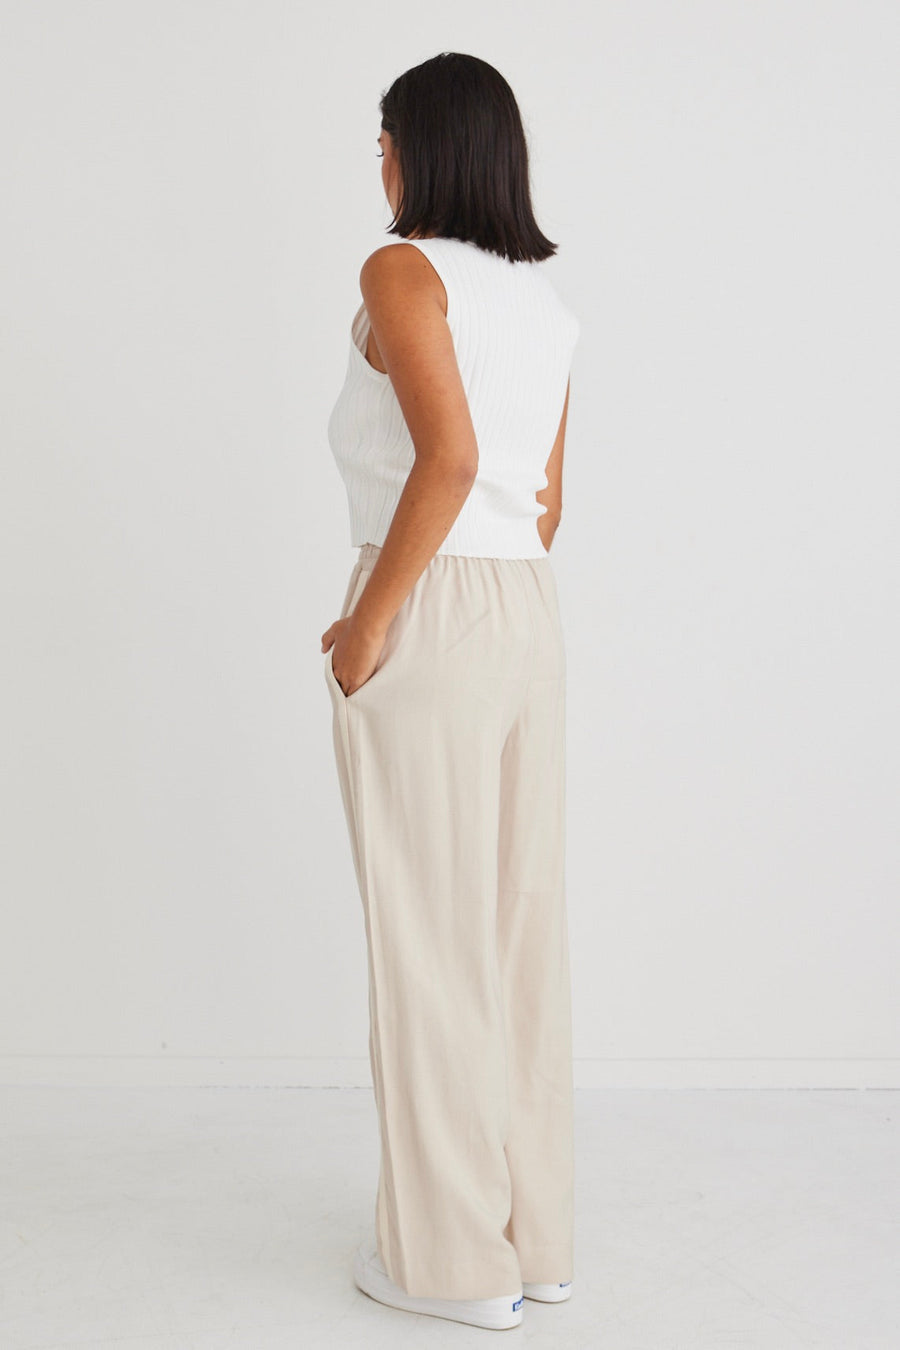 STORIES TO BE TOLD TOWNIE SAND STRIPE SIDE TAPE WIDE LEG PANTS - ECRU - WILD ROSE